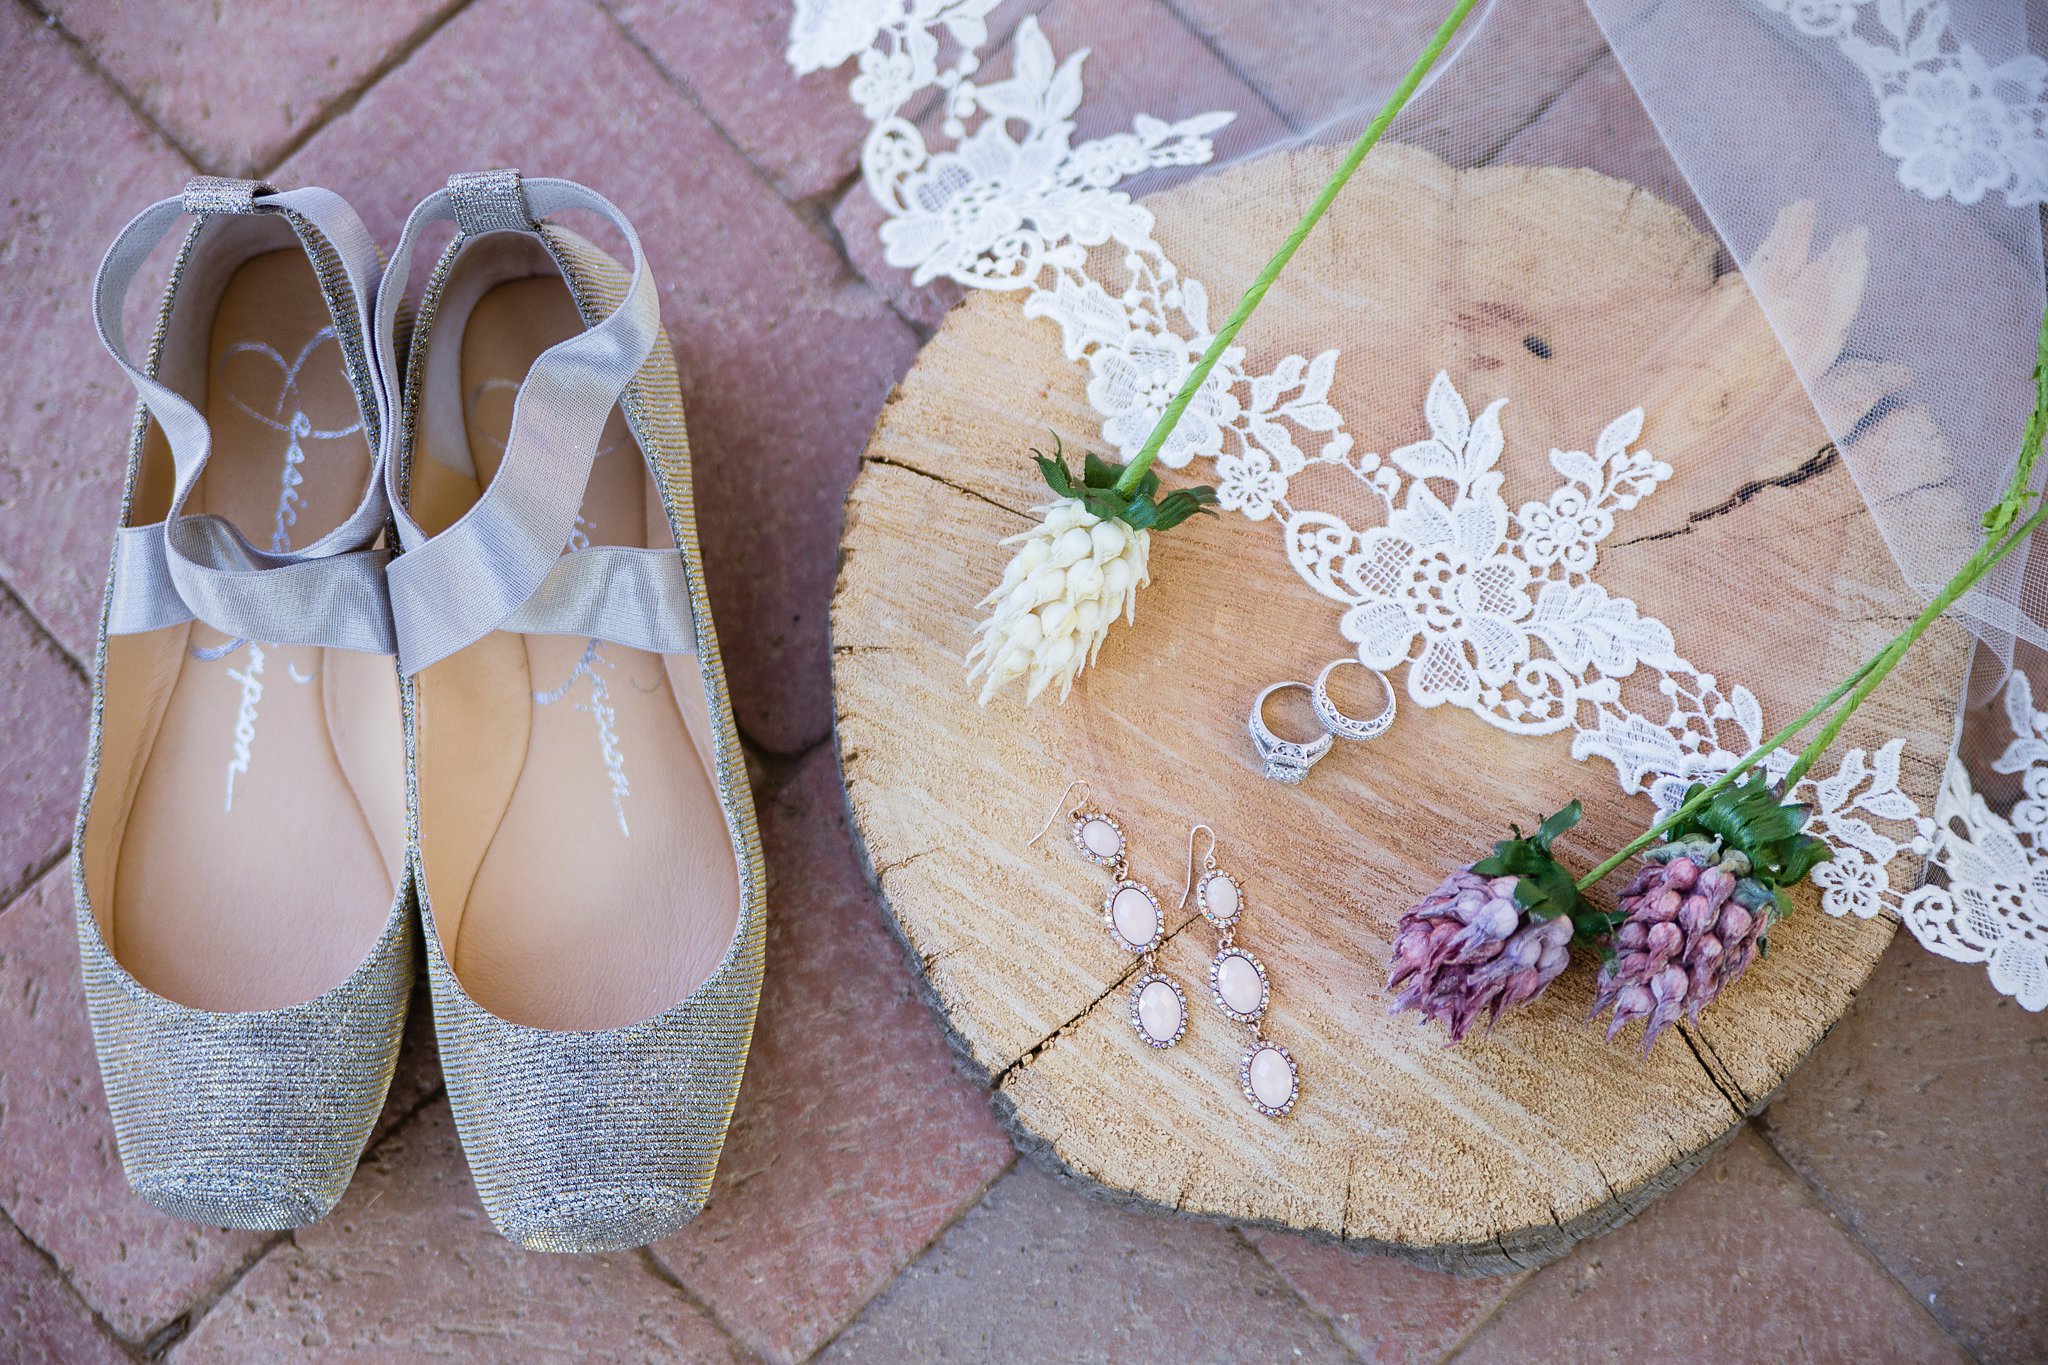 Bridal wedding details featuring silver flats and pink drop earrings by wedding photographers PMA Photography.